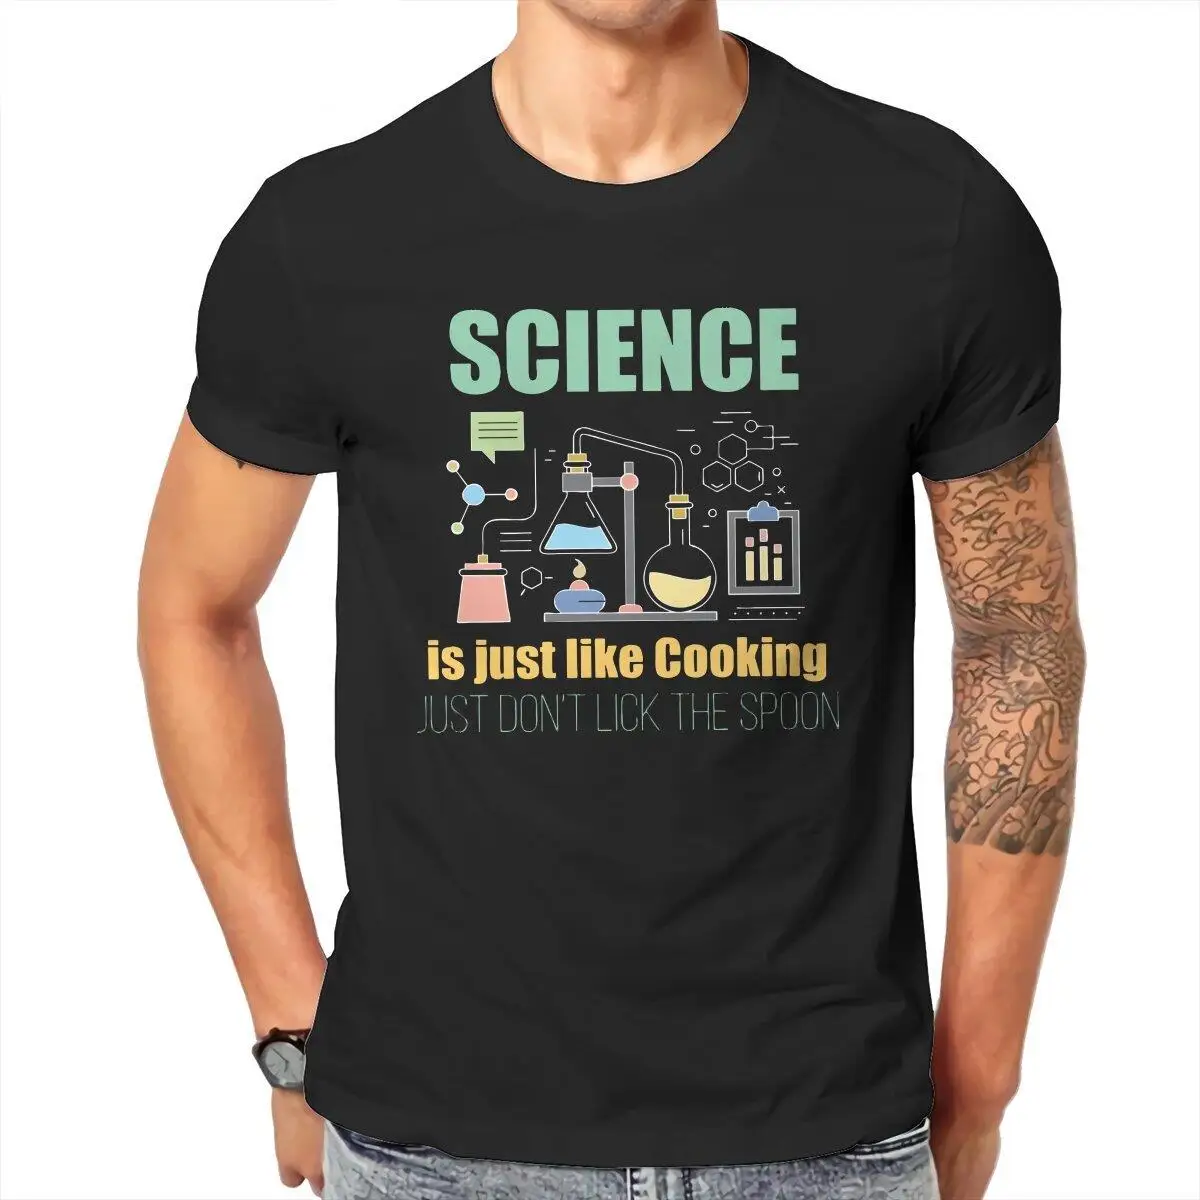 Science Is Just Like Cooking  T Shirts Men's  Cotton Creative T-Shirts Chemistry Scientist Tee Shirt Short Sleeve Clothing 6XL